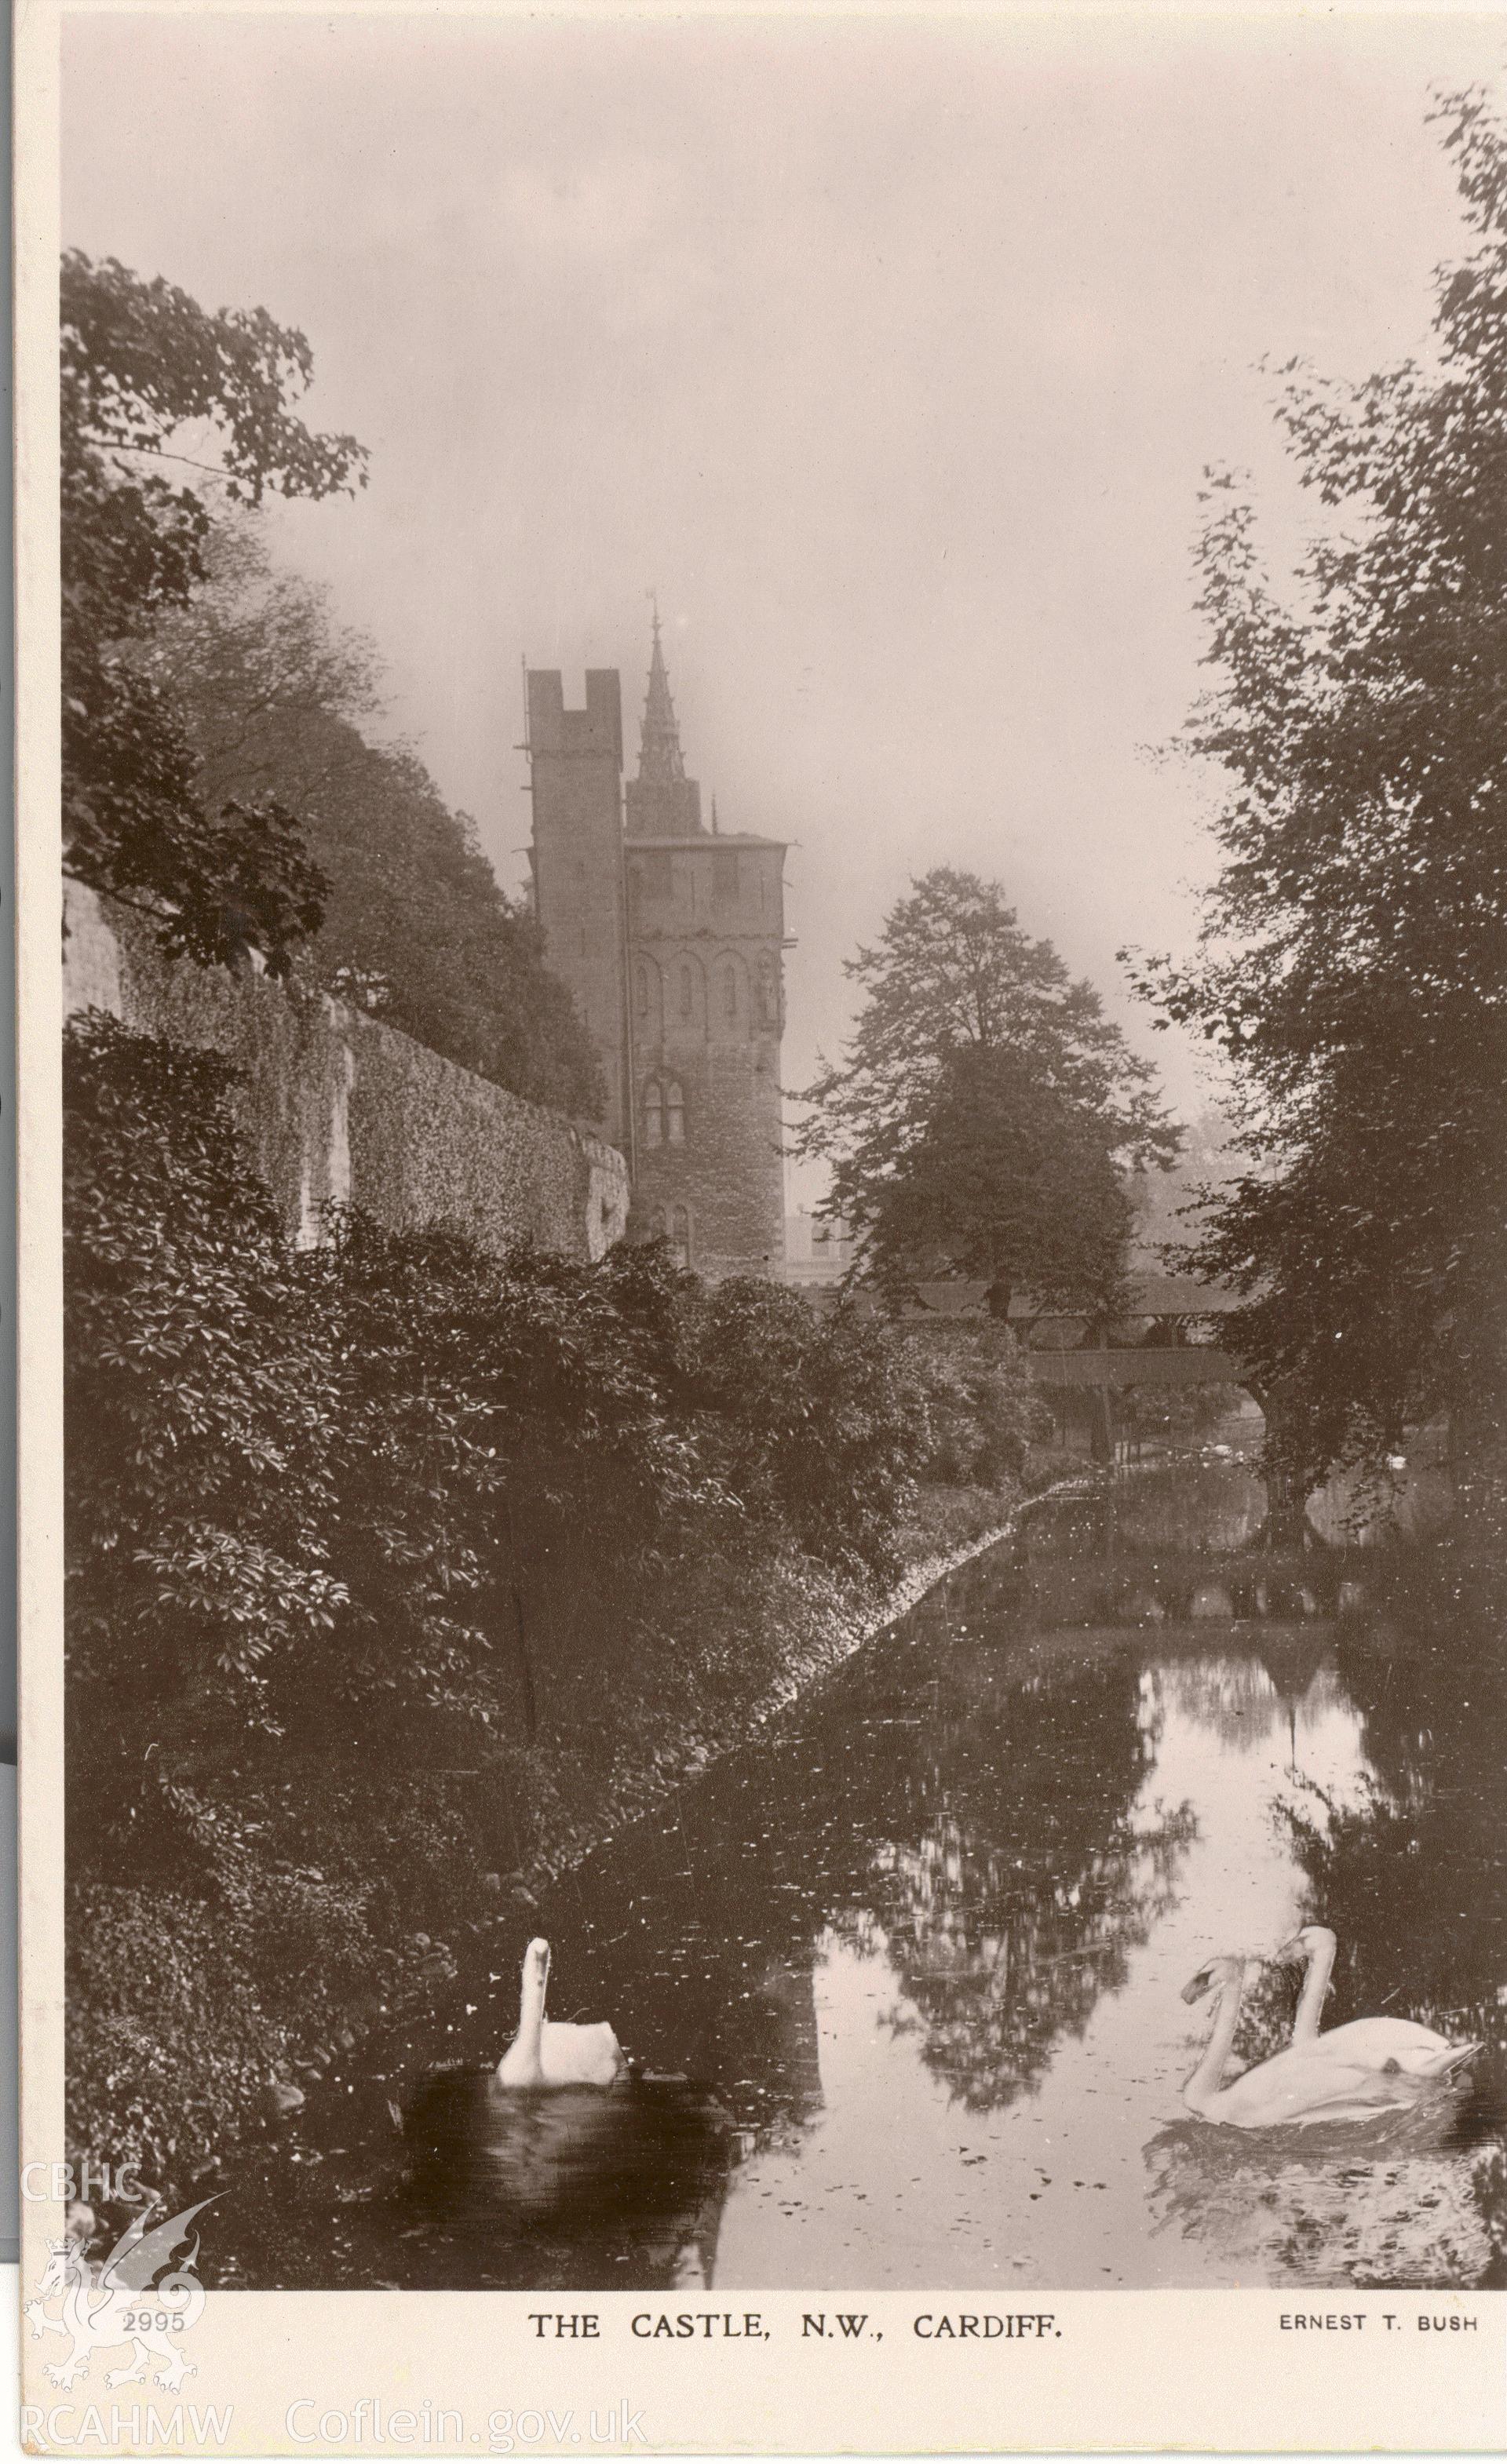 Digitised postcard image of Cardiff Castle from the north-west, The Royal Photographic Company, London. Produced by Parks and Gardens Data Services, from an original item in the Peter Davis Collection at Parks and Gardens UK. We hold only web-resolution images of this collection, suitable for viewing on screen and for research purposes only. We do not hold the original images, or publication quality scans.